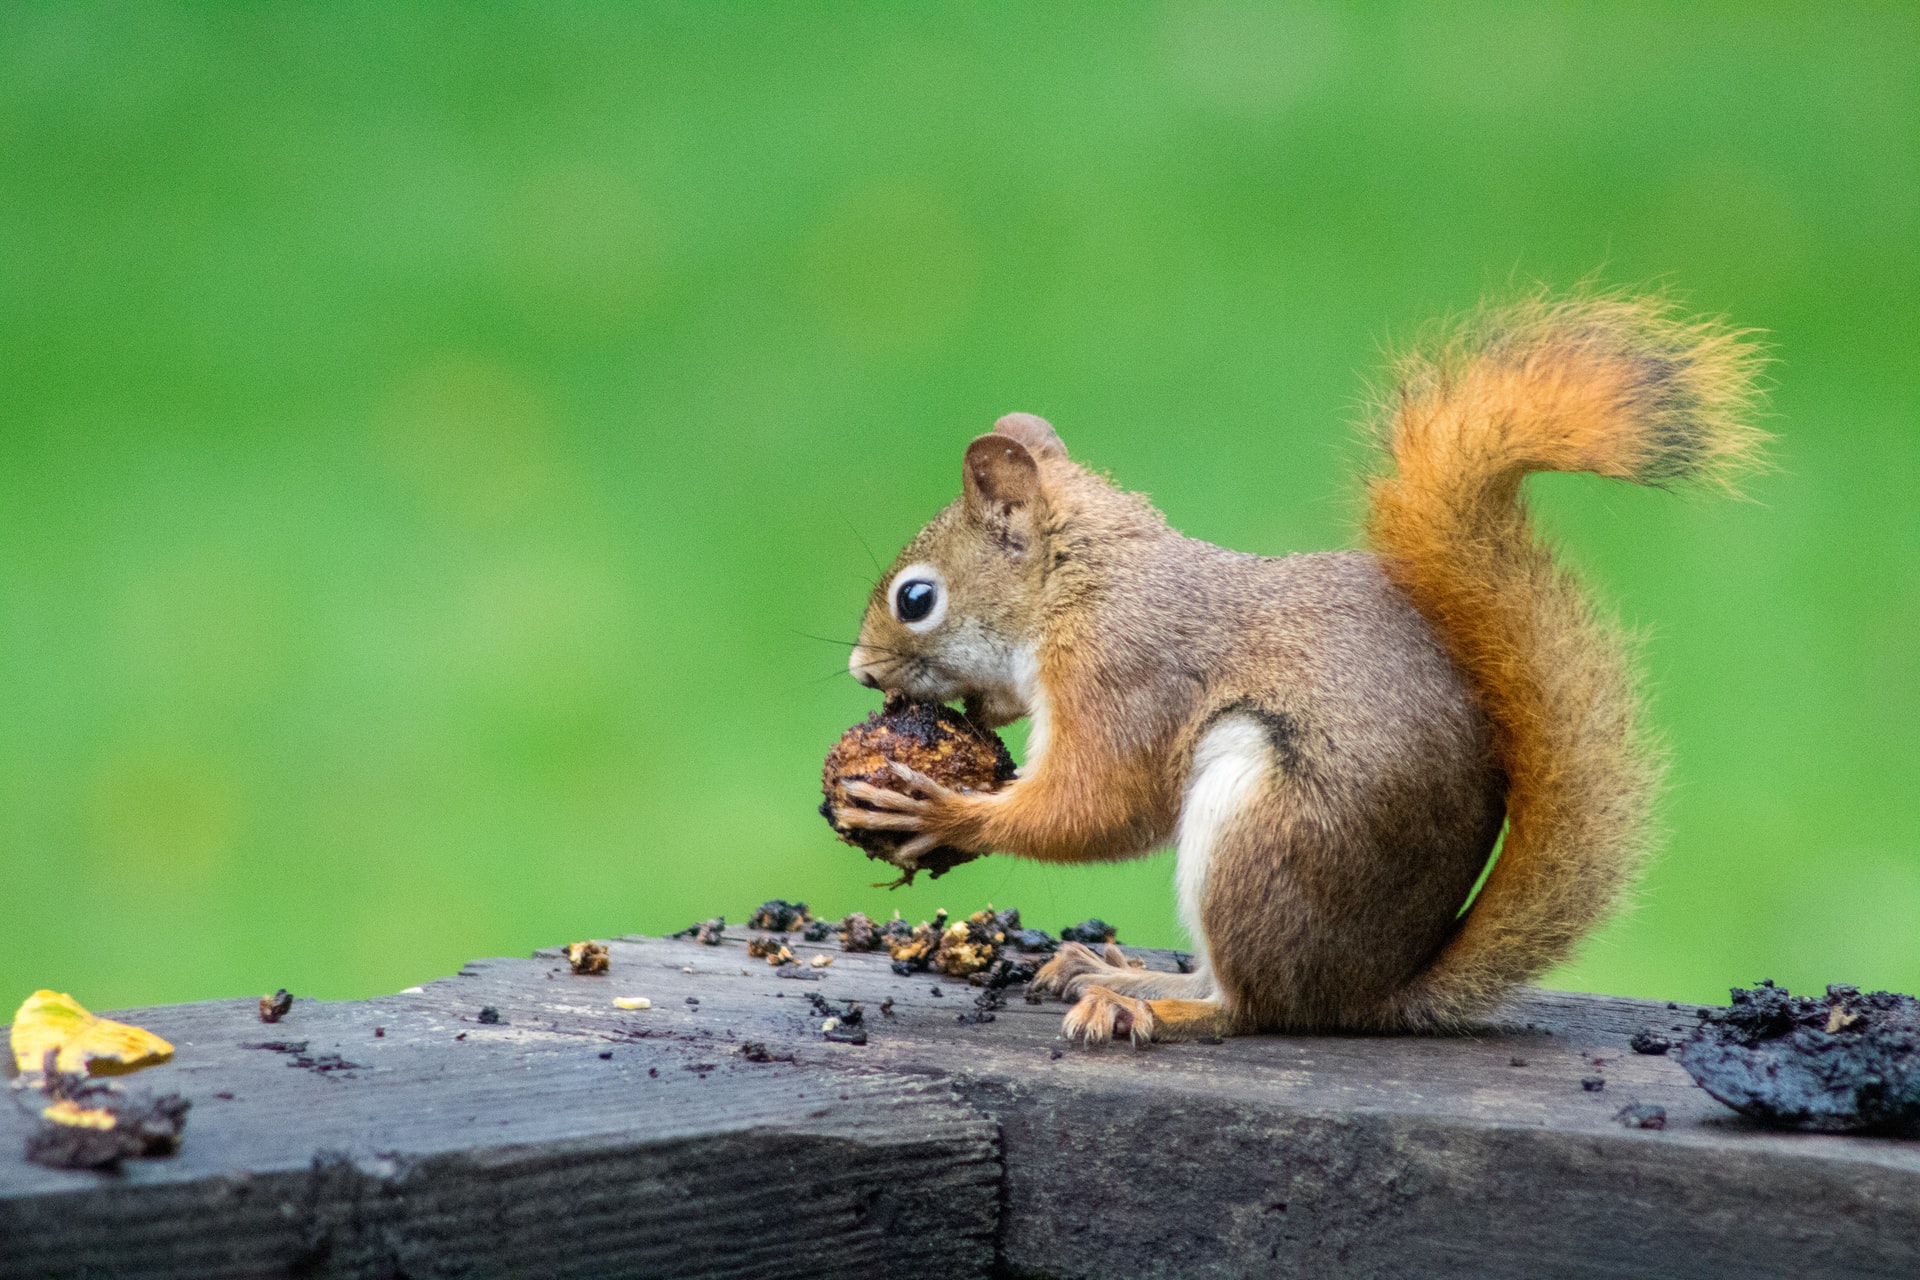 Can You Eat Squirrel From Your Backyard?